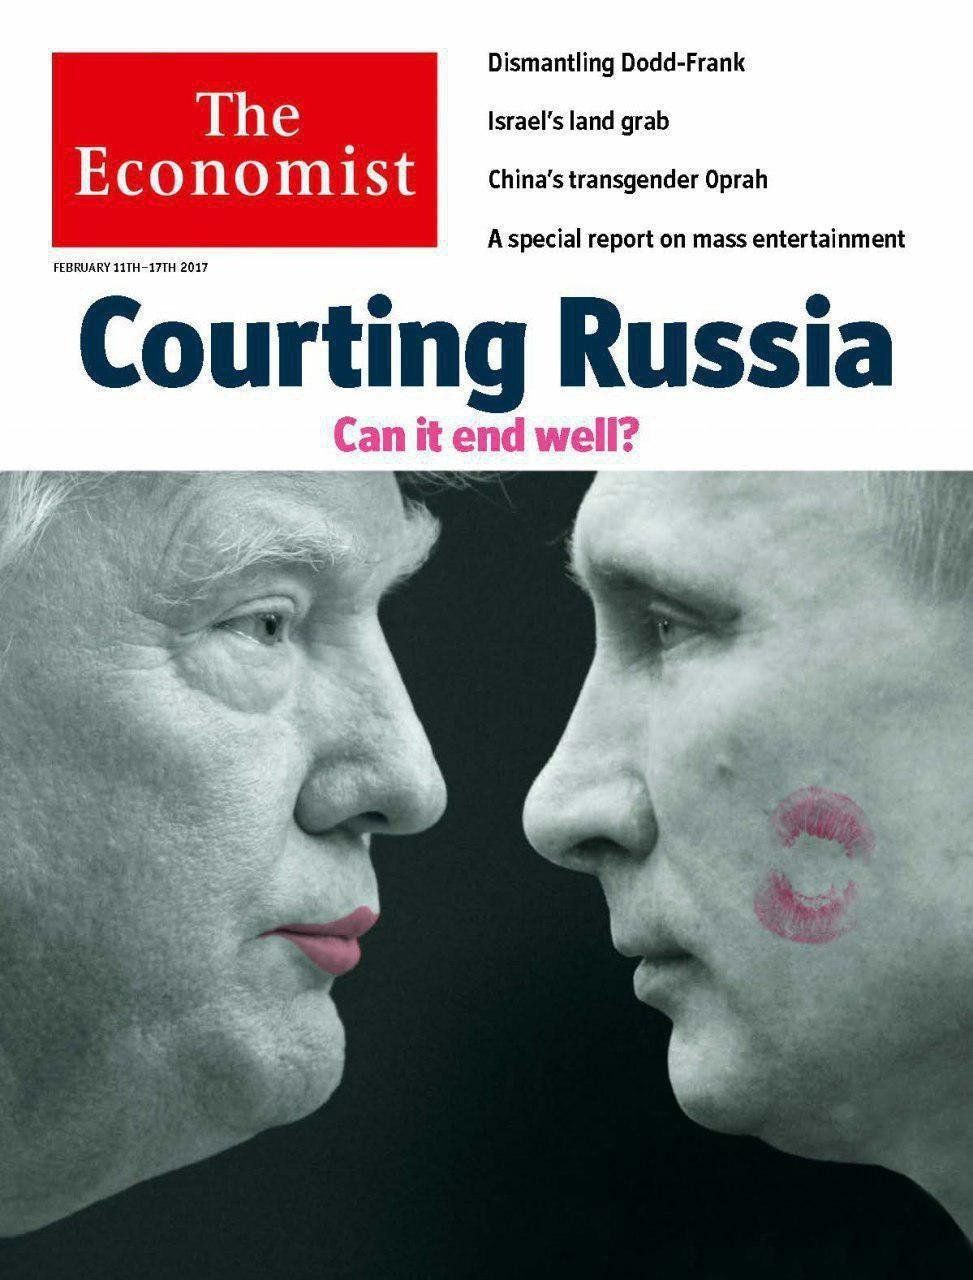 A lipstick-wearing Donald Trump puckers up to Vladimir Putin on the cover of The Economist.